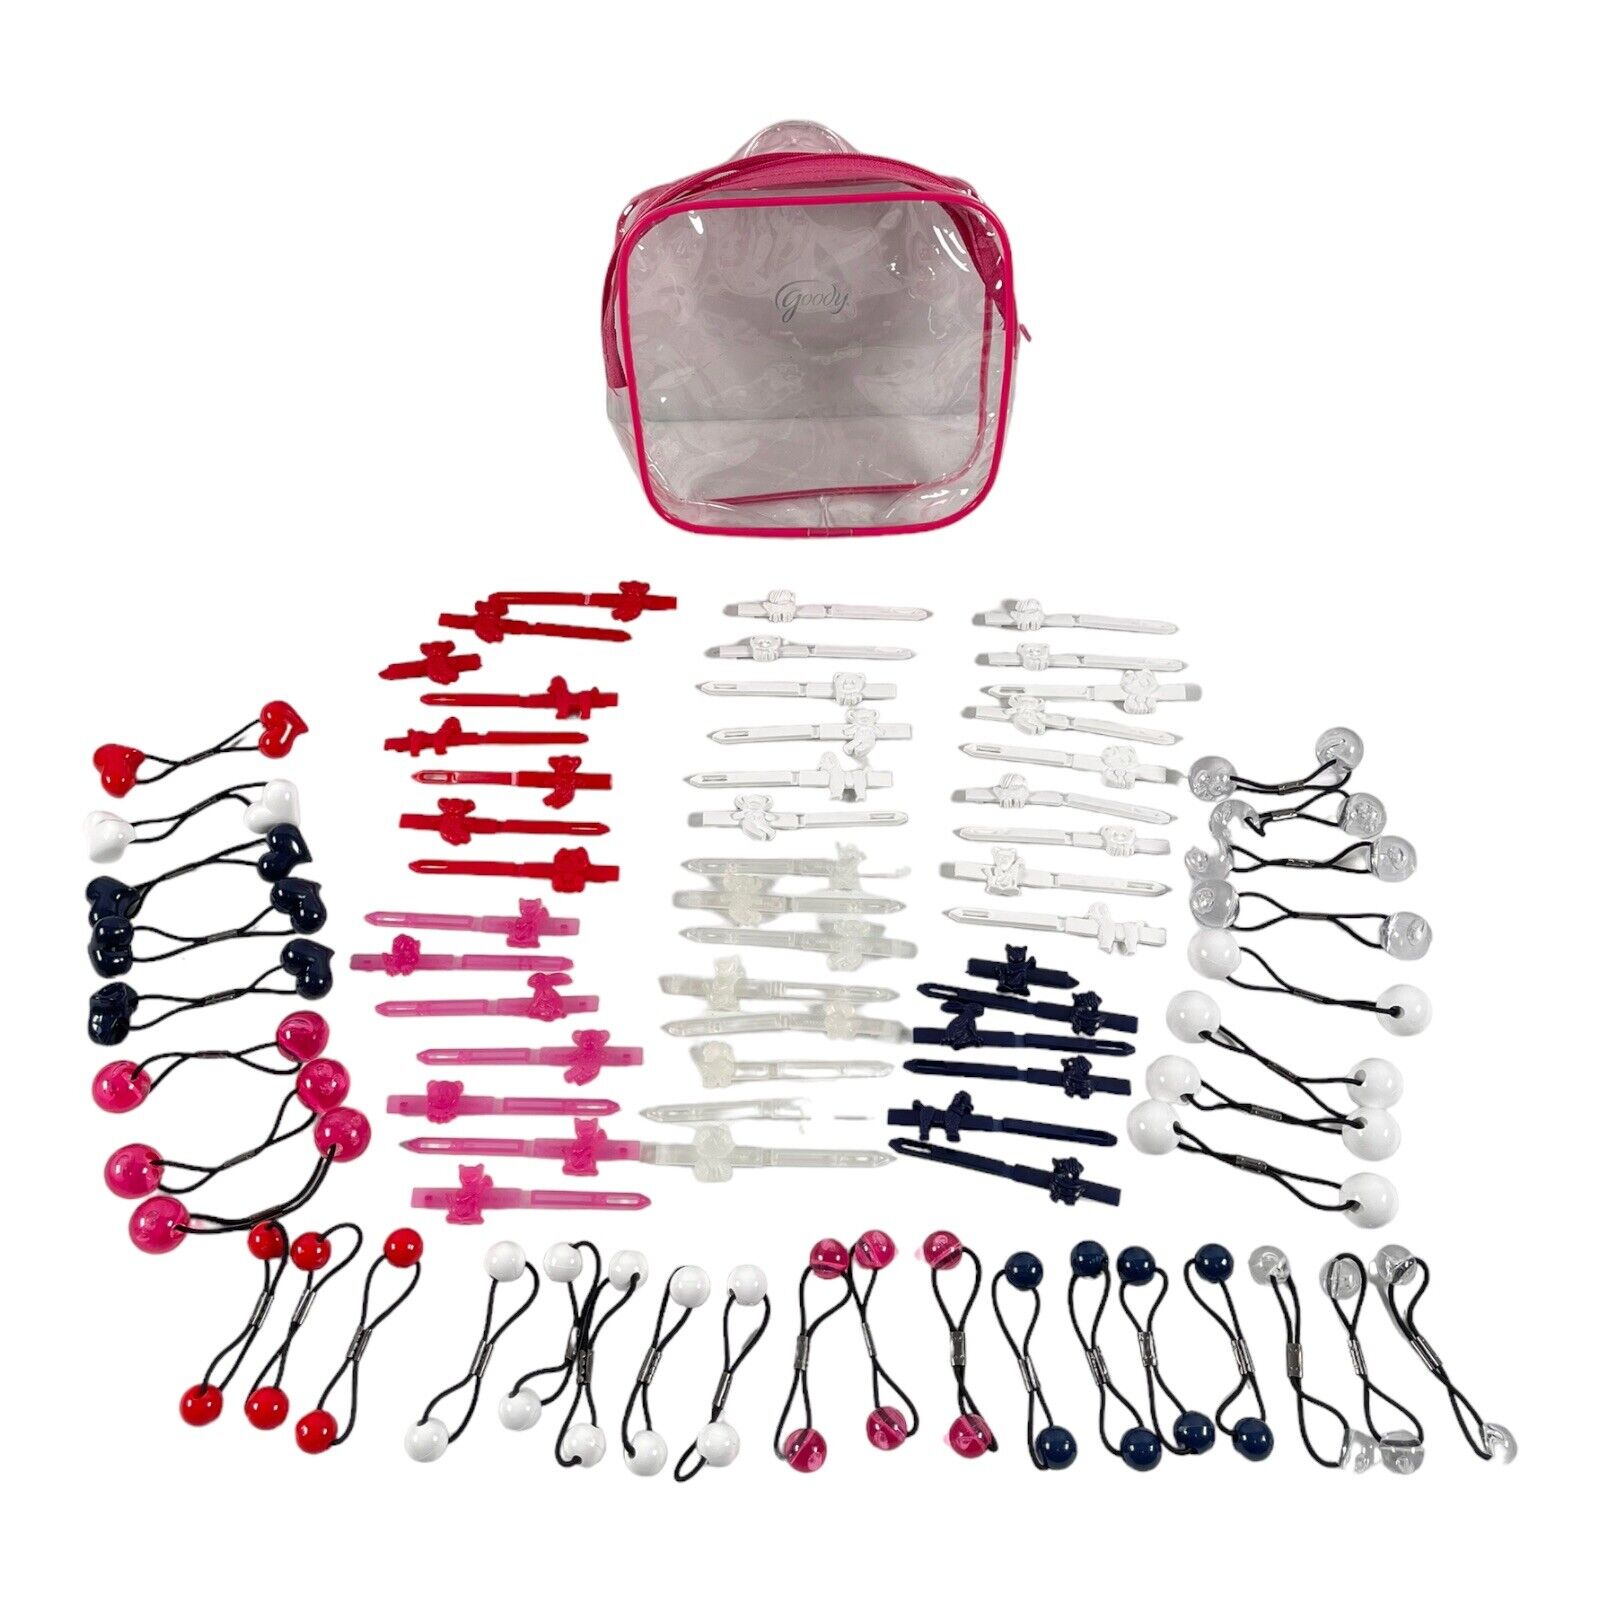 Goody Hair 78pc Snap Tight Barrettes & Knocker Ball Ponytail Holders & Case